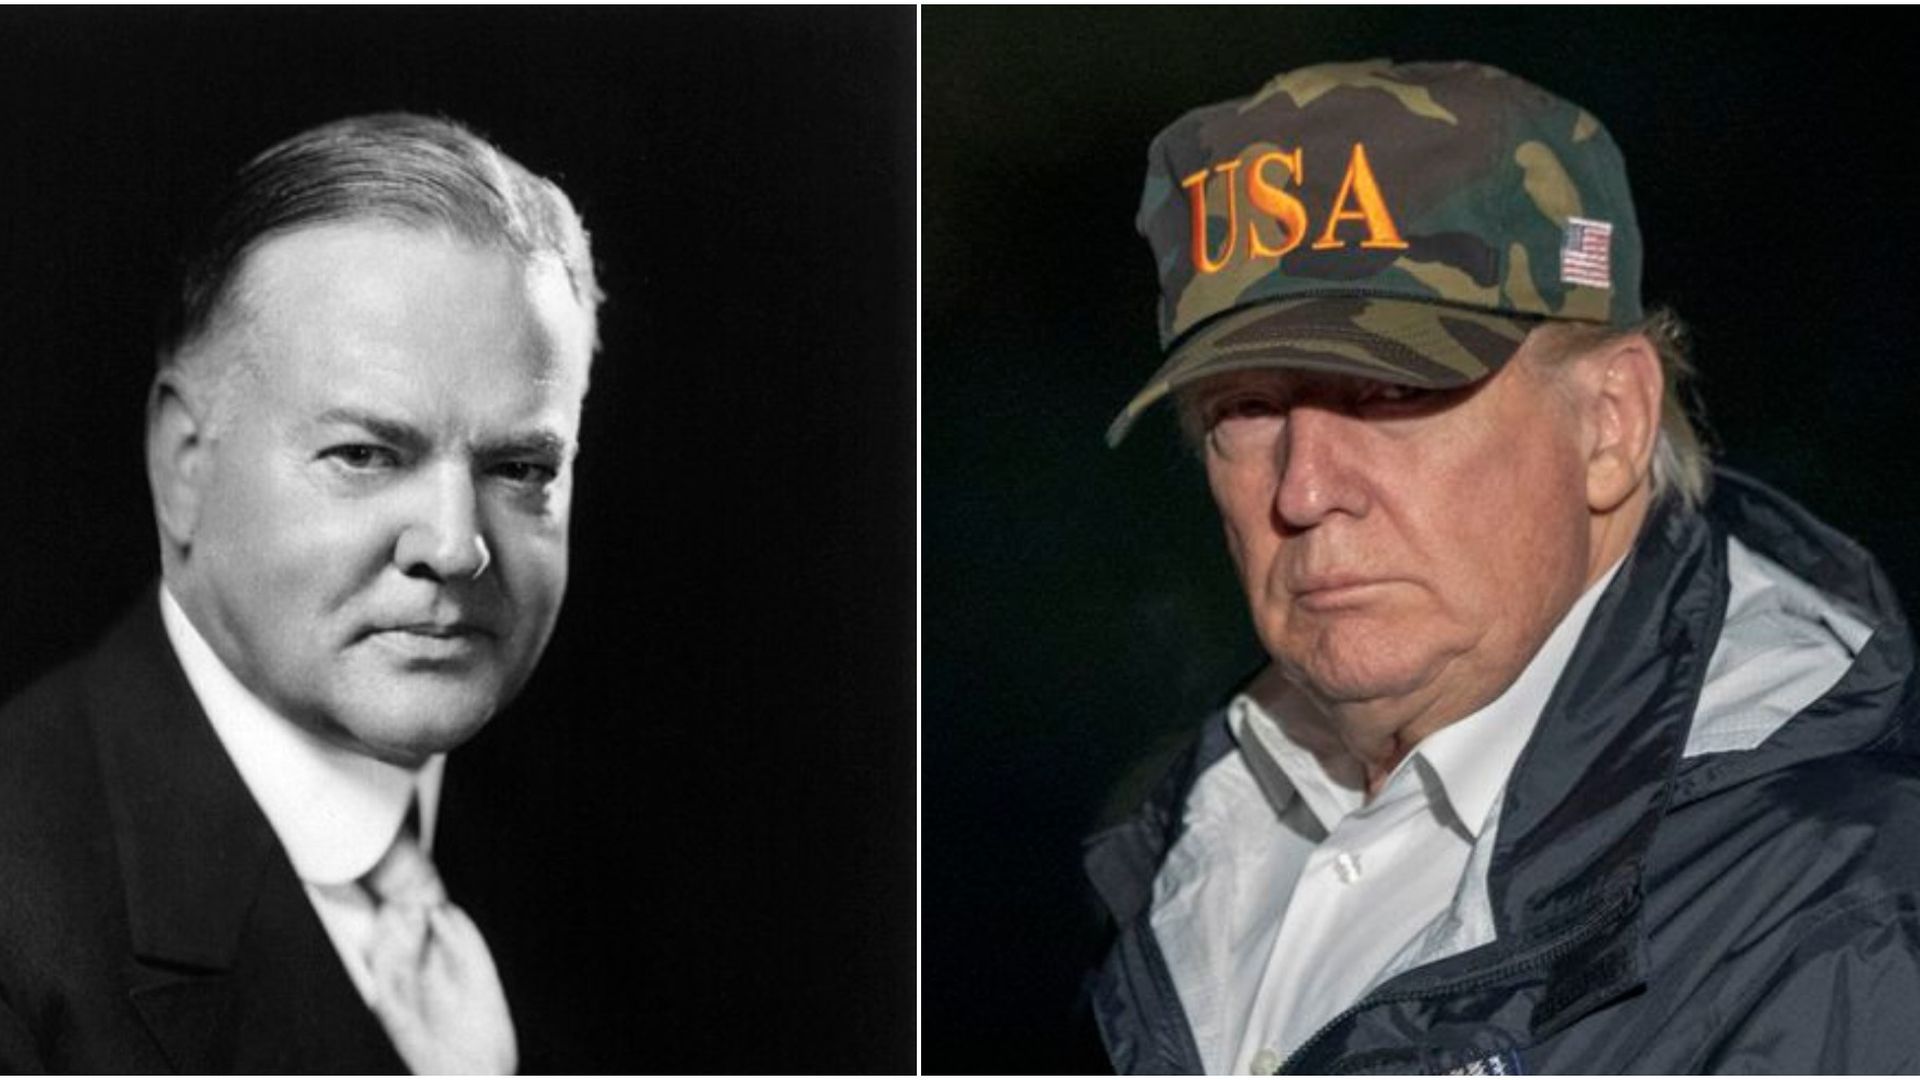 On the left, Herbert Hoover. On the right, Donald Trump